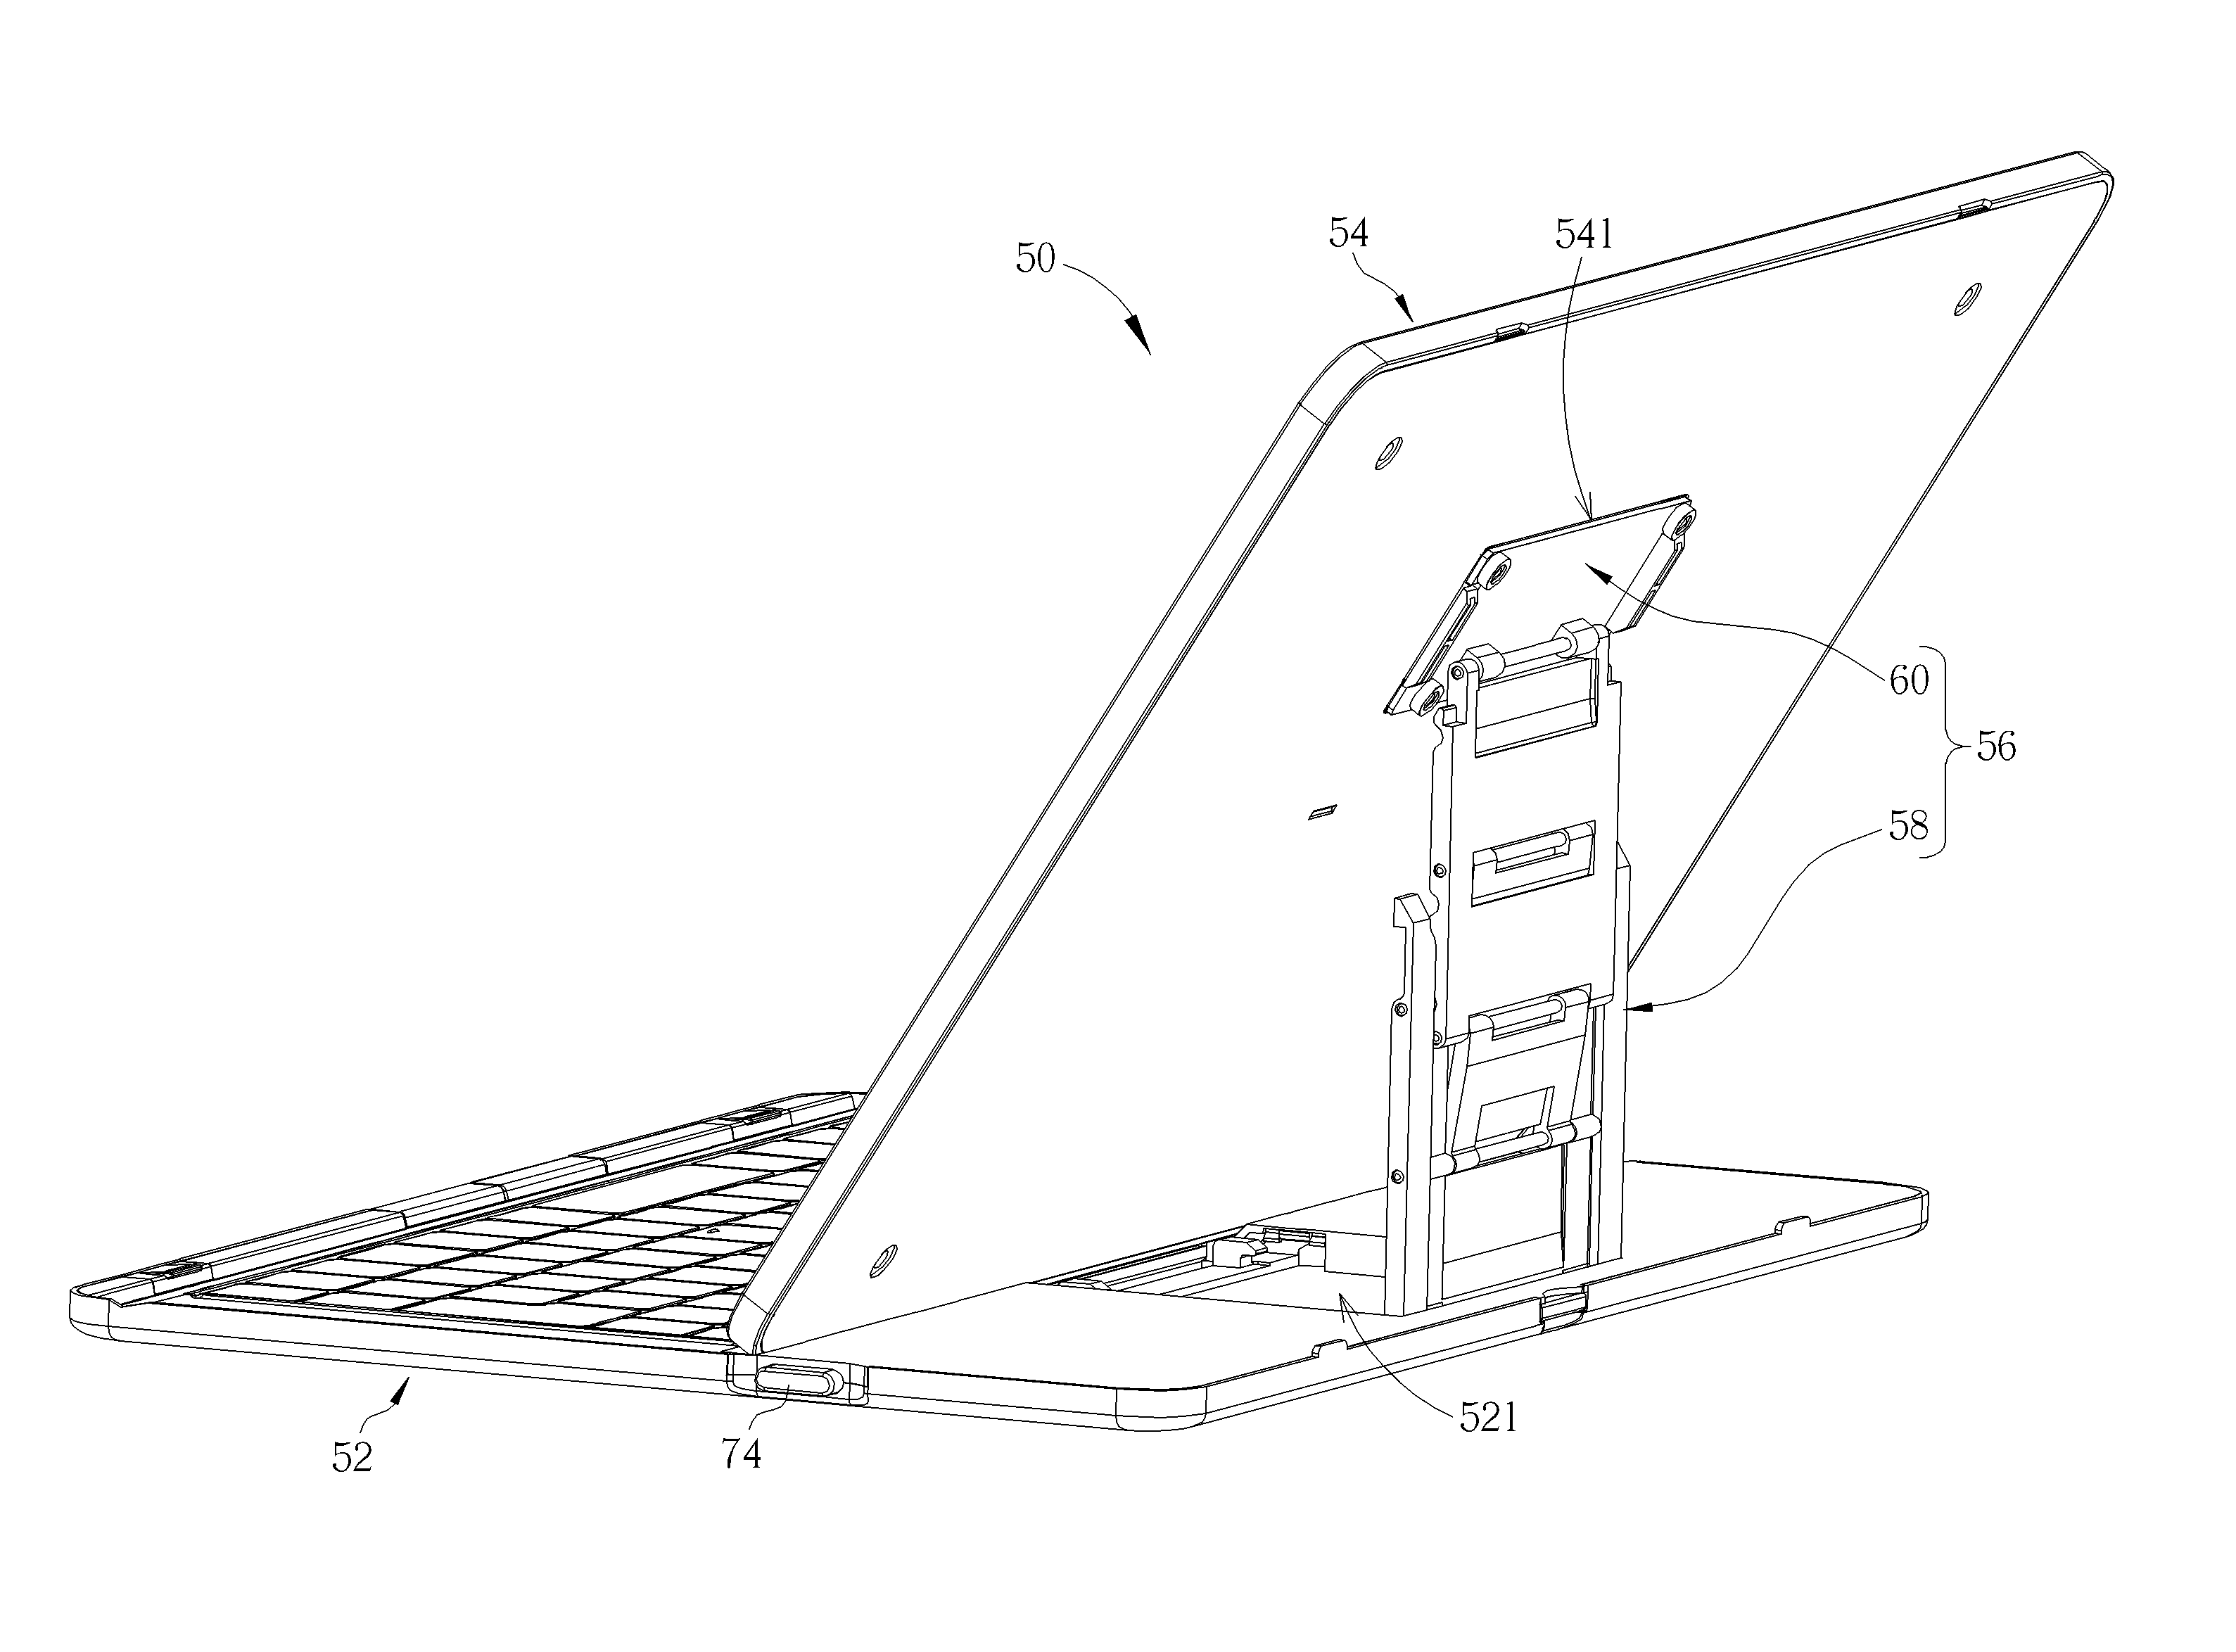 Supporting mechanism for supporting a display module on a base and portable electronic device therewith